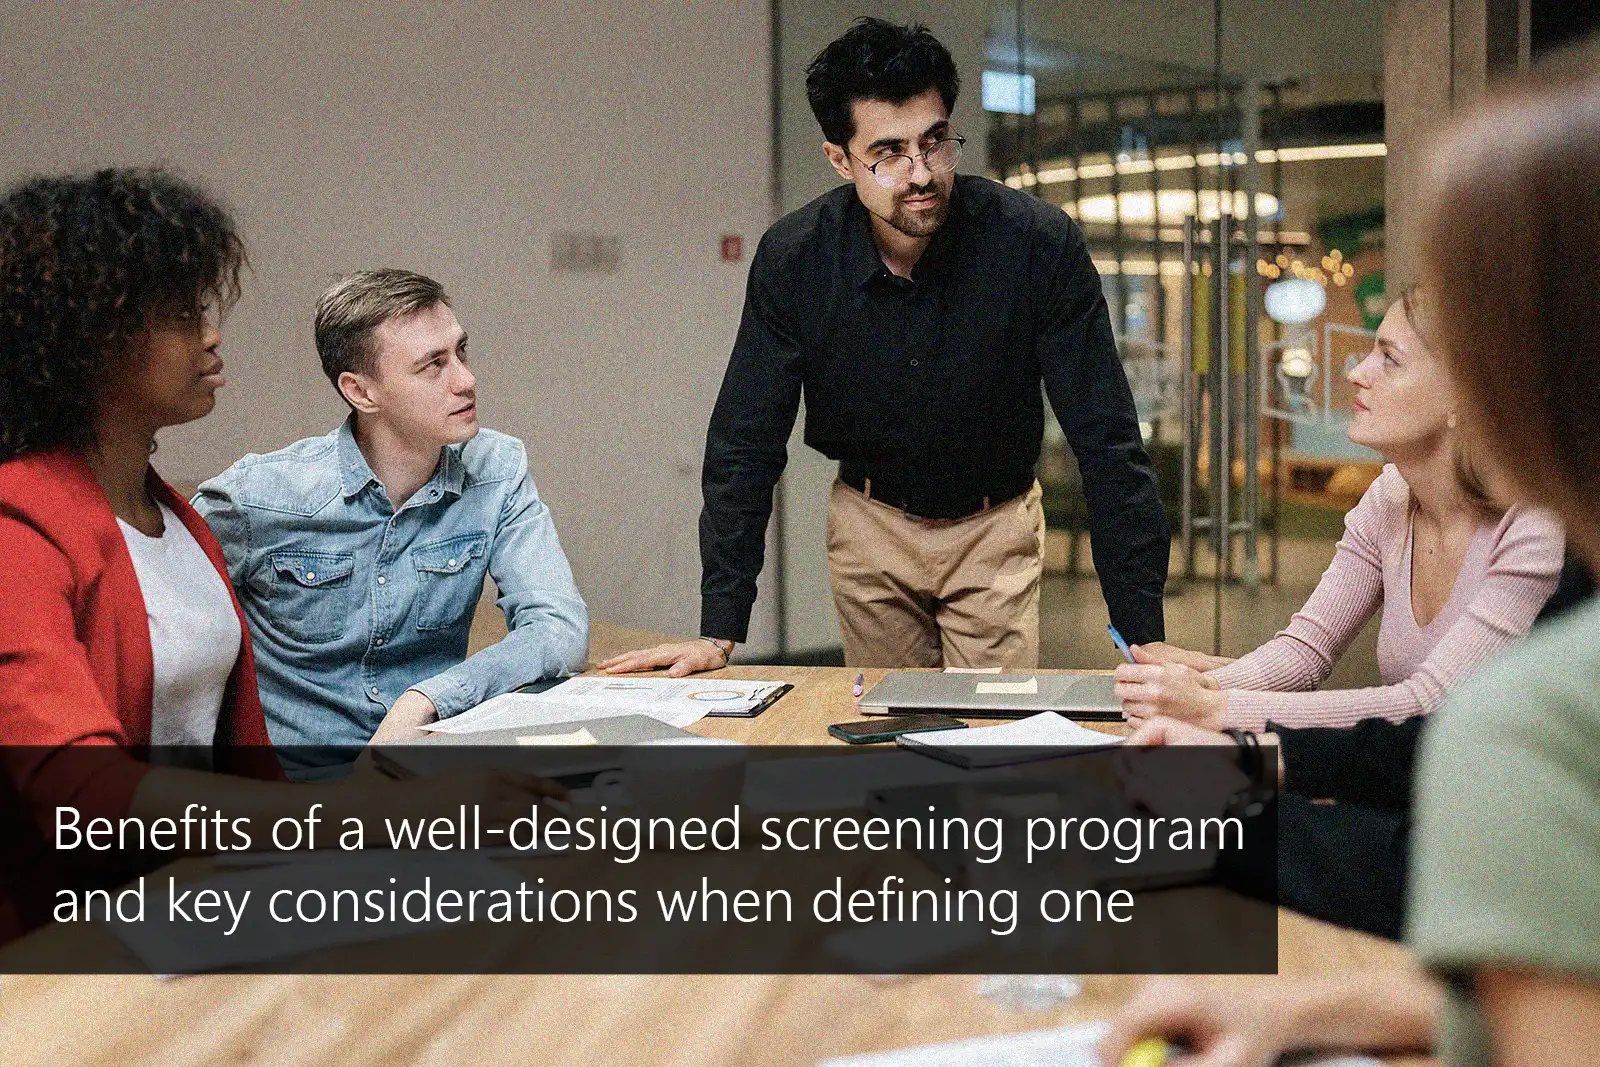 Benefits of a well-designed screening program and key considerations